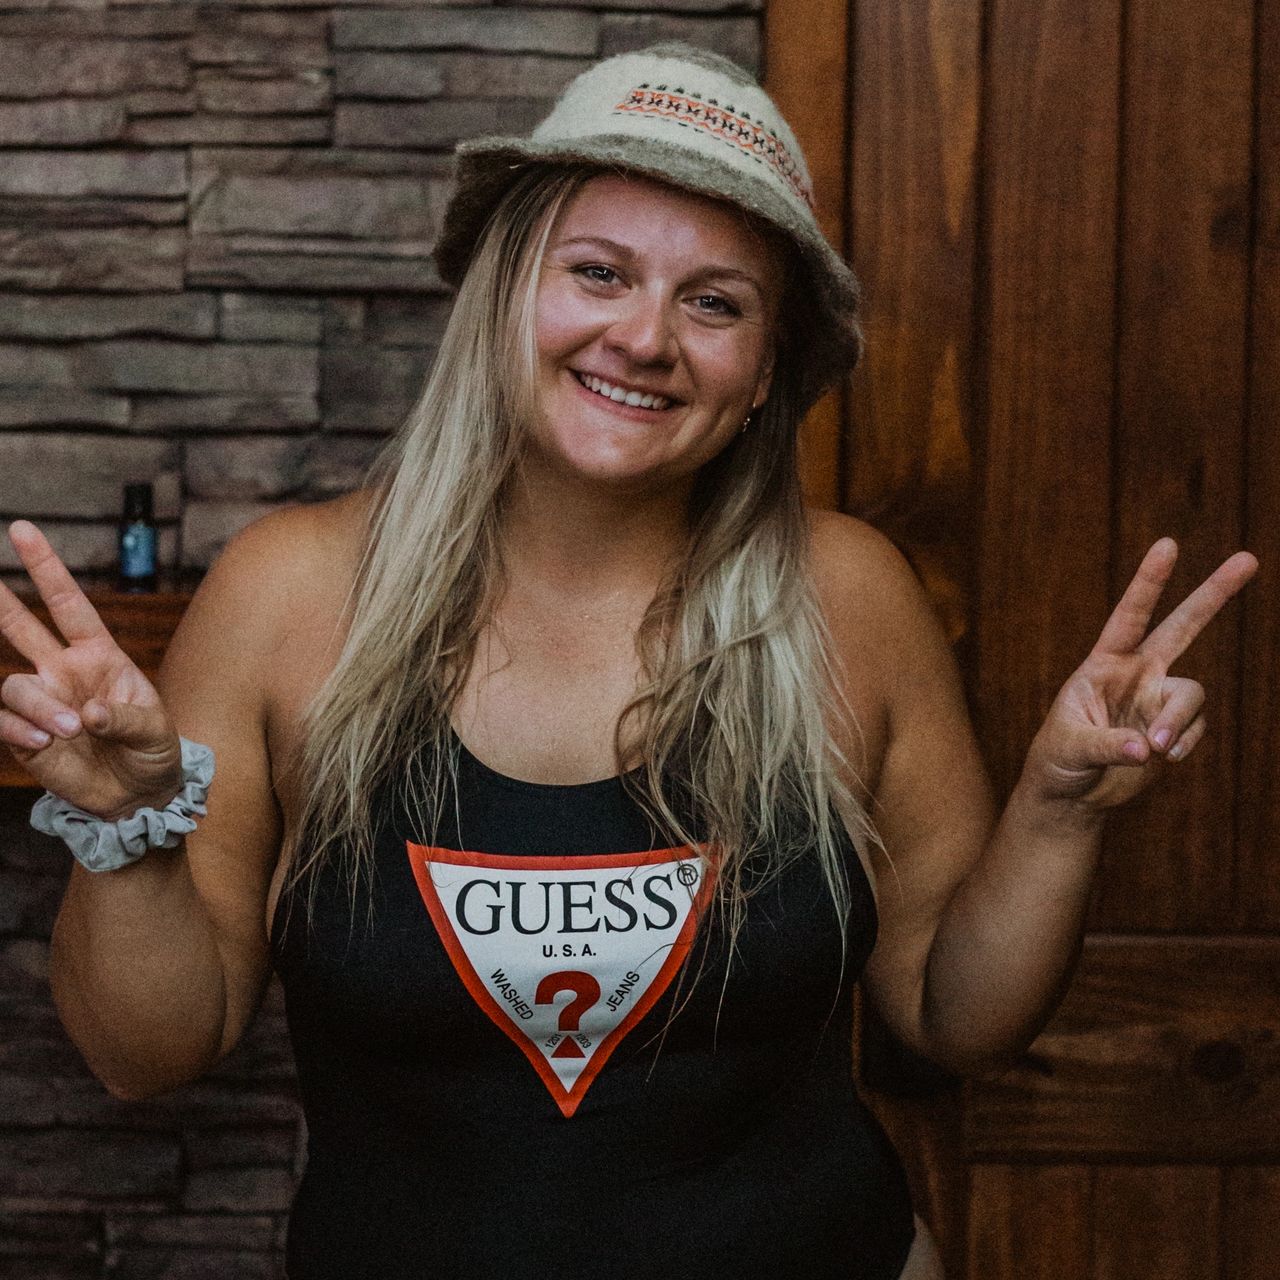 a woman wearing a black tank top and hat smiling and doing the peace sign with both her hands